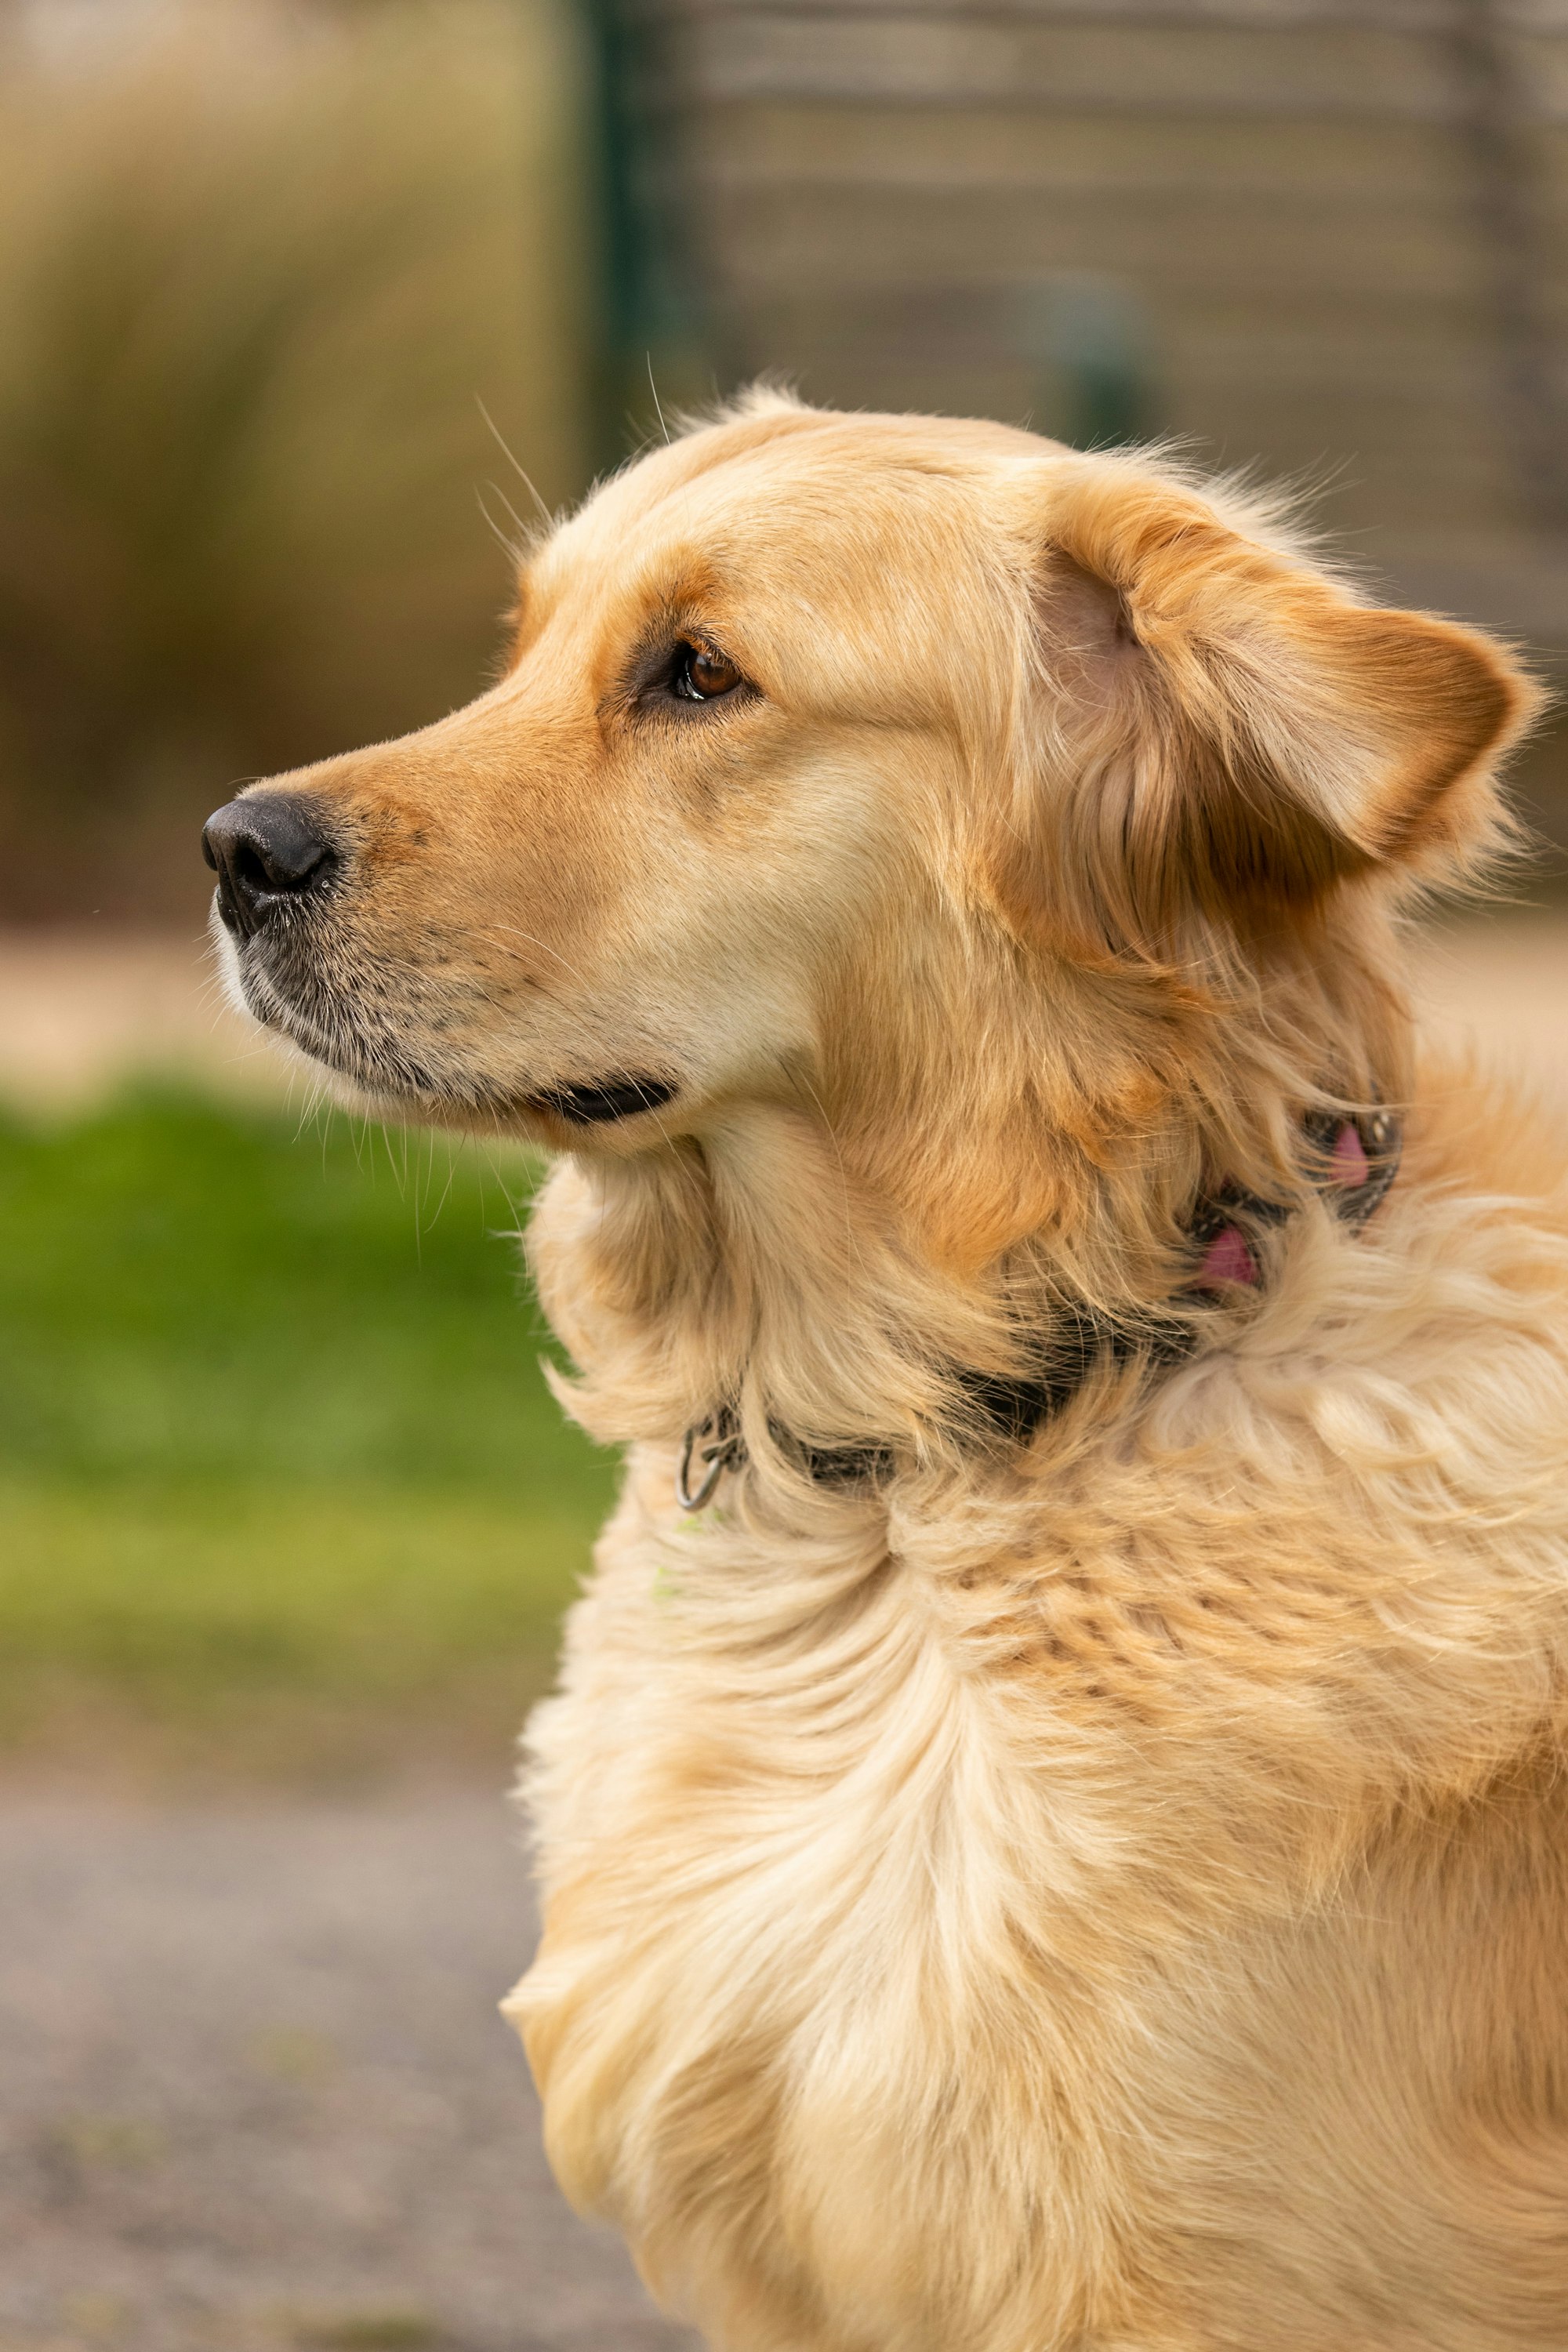 What To Know About A Golden Retriever's Long Hair